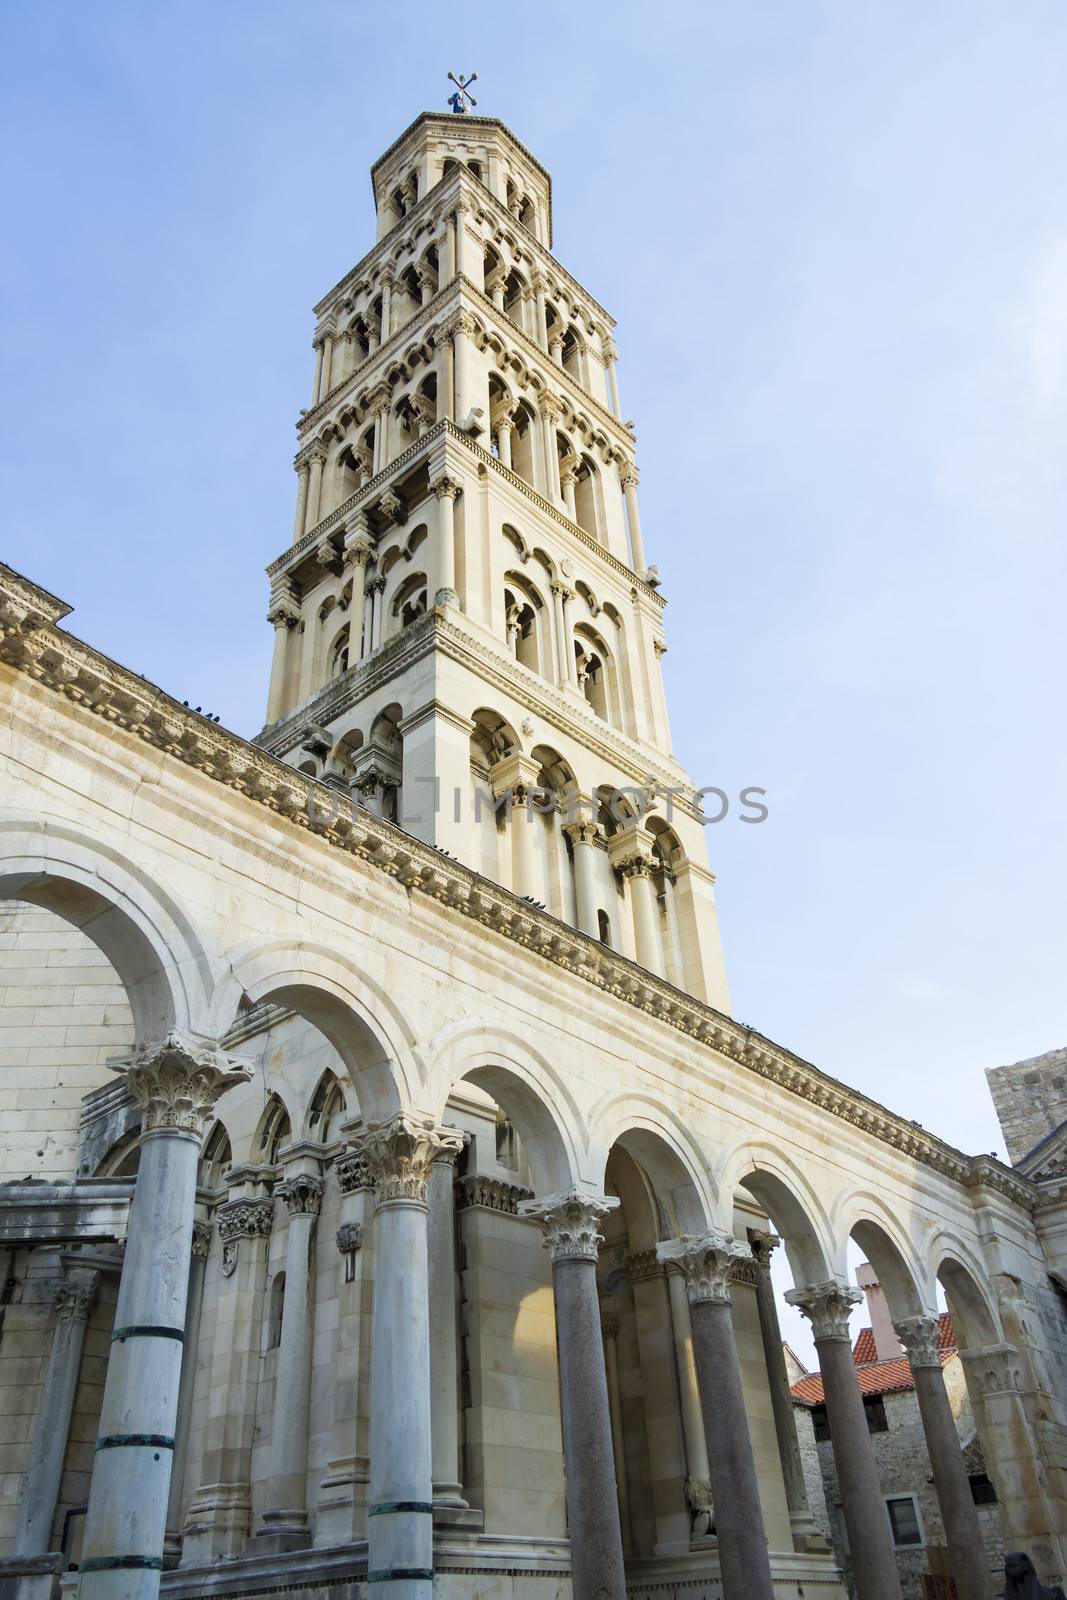 Diocletian palace ruins and cathedral bell tower, Split, Croatia by Tetyana